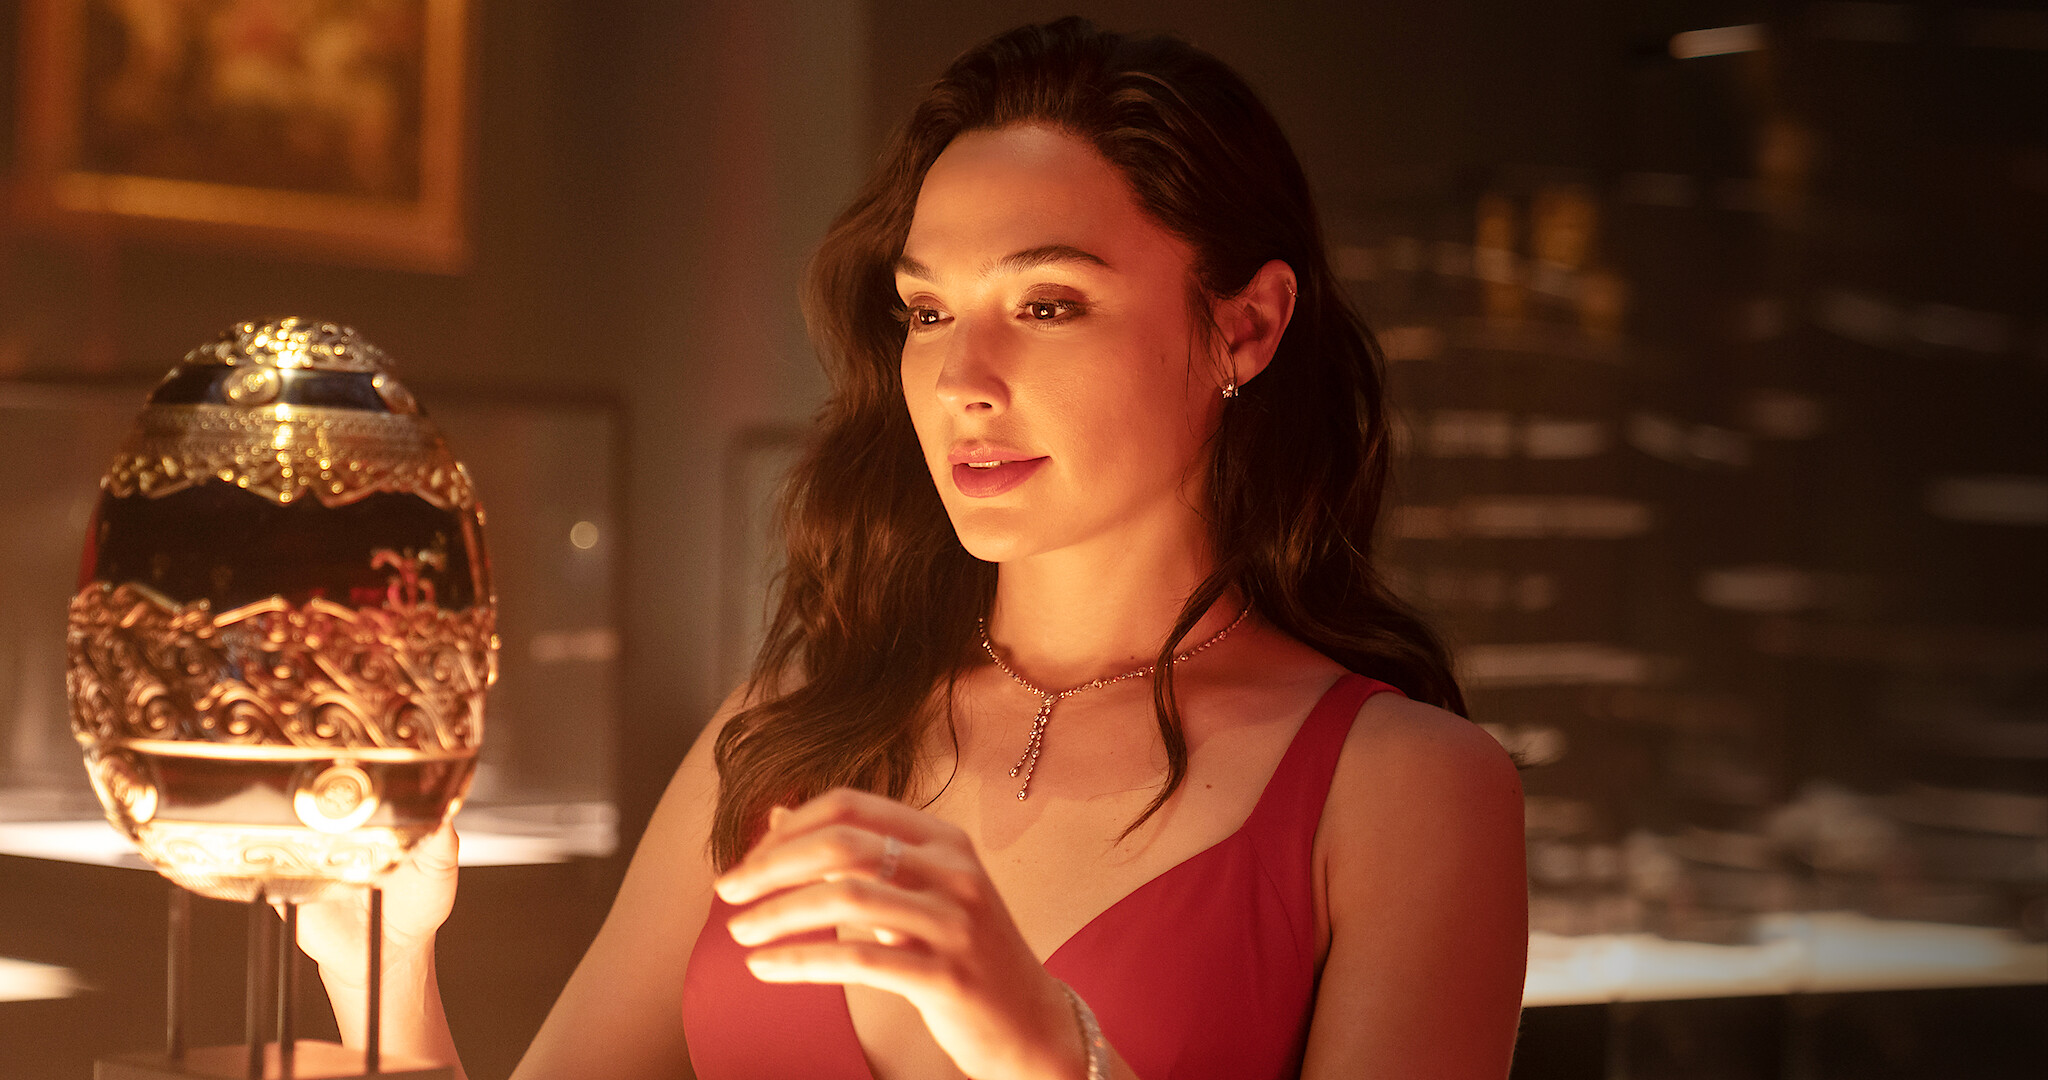 let it rip — GAL GADOT and DWAYNE JOHNSON in RED NOTICE (2021)